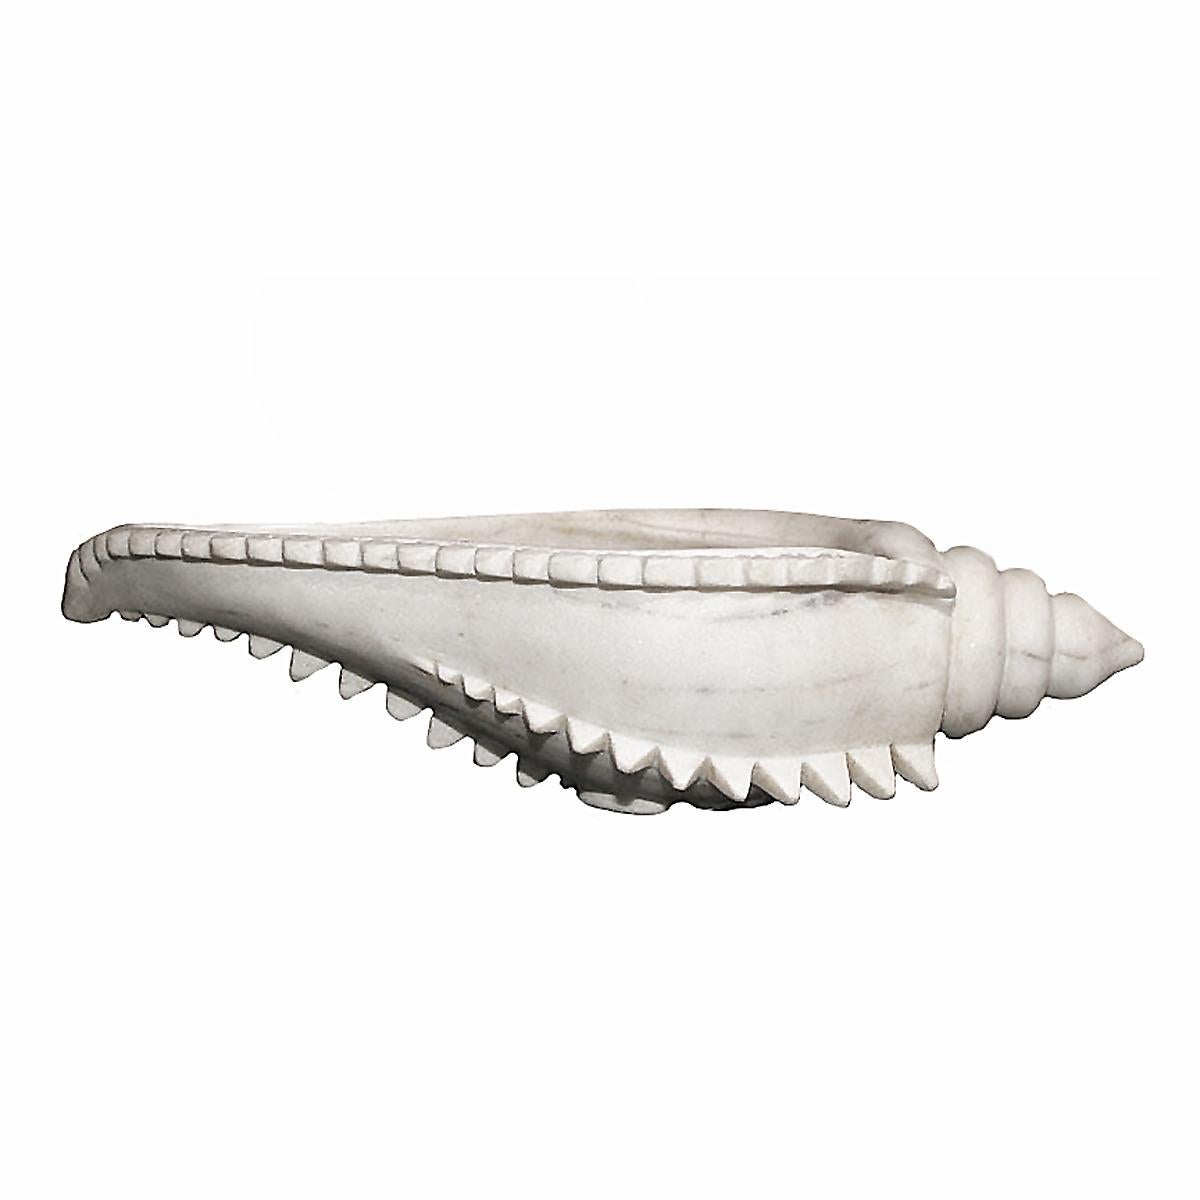 A hand carved white marble bowl from India, in the shape of a large sea conch.